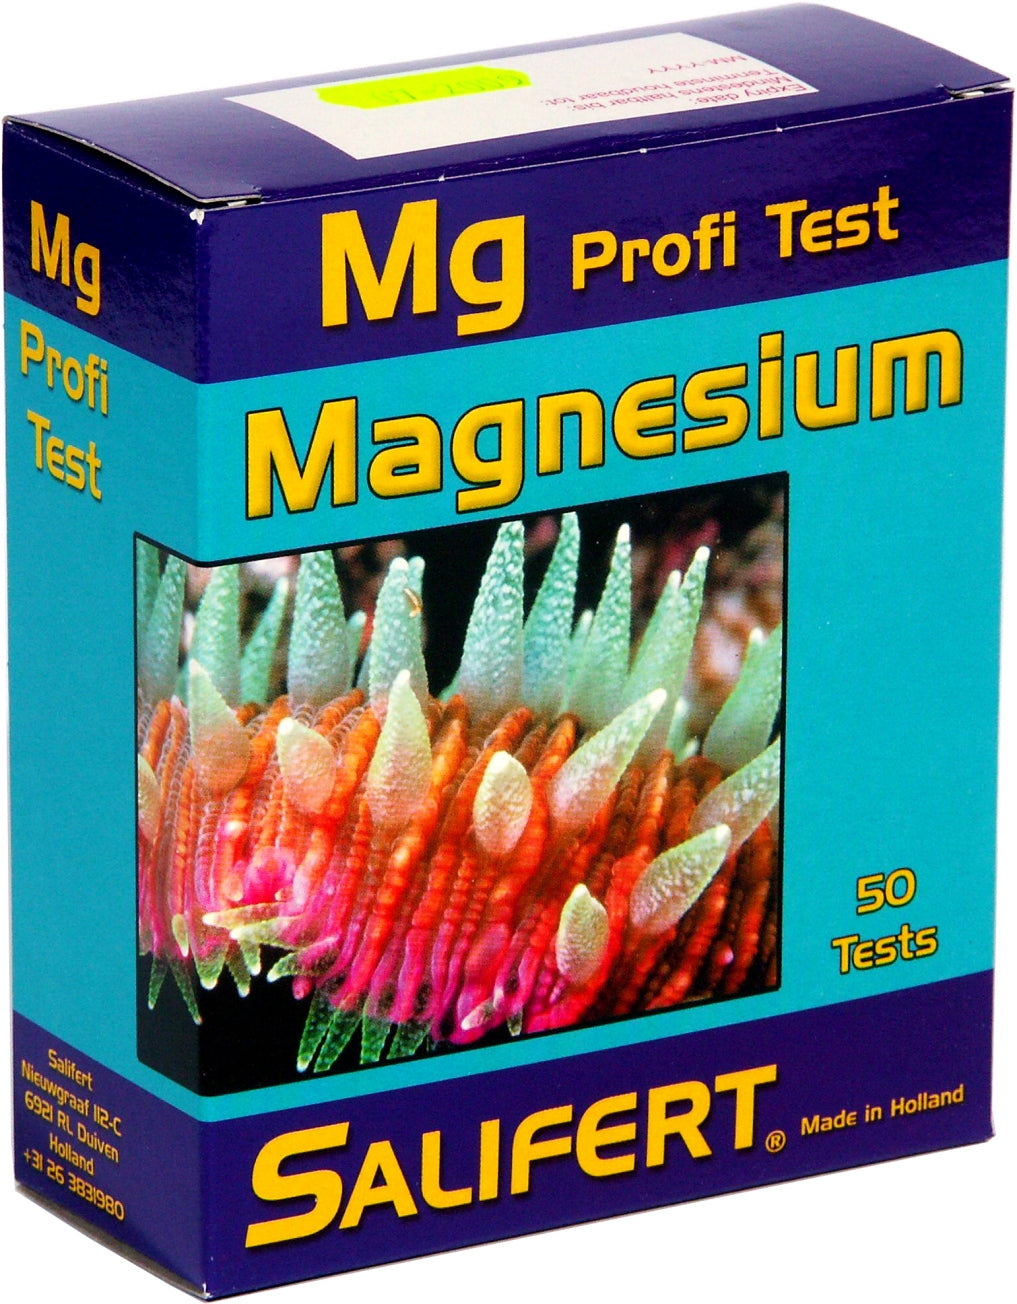 Salifert Magnesium Mg Profi Test available at Coral Passion in Essex